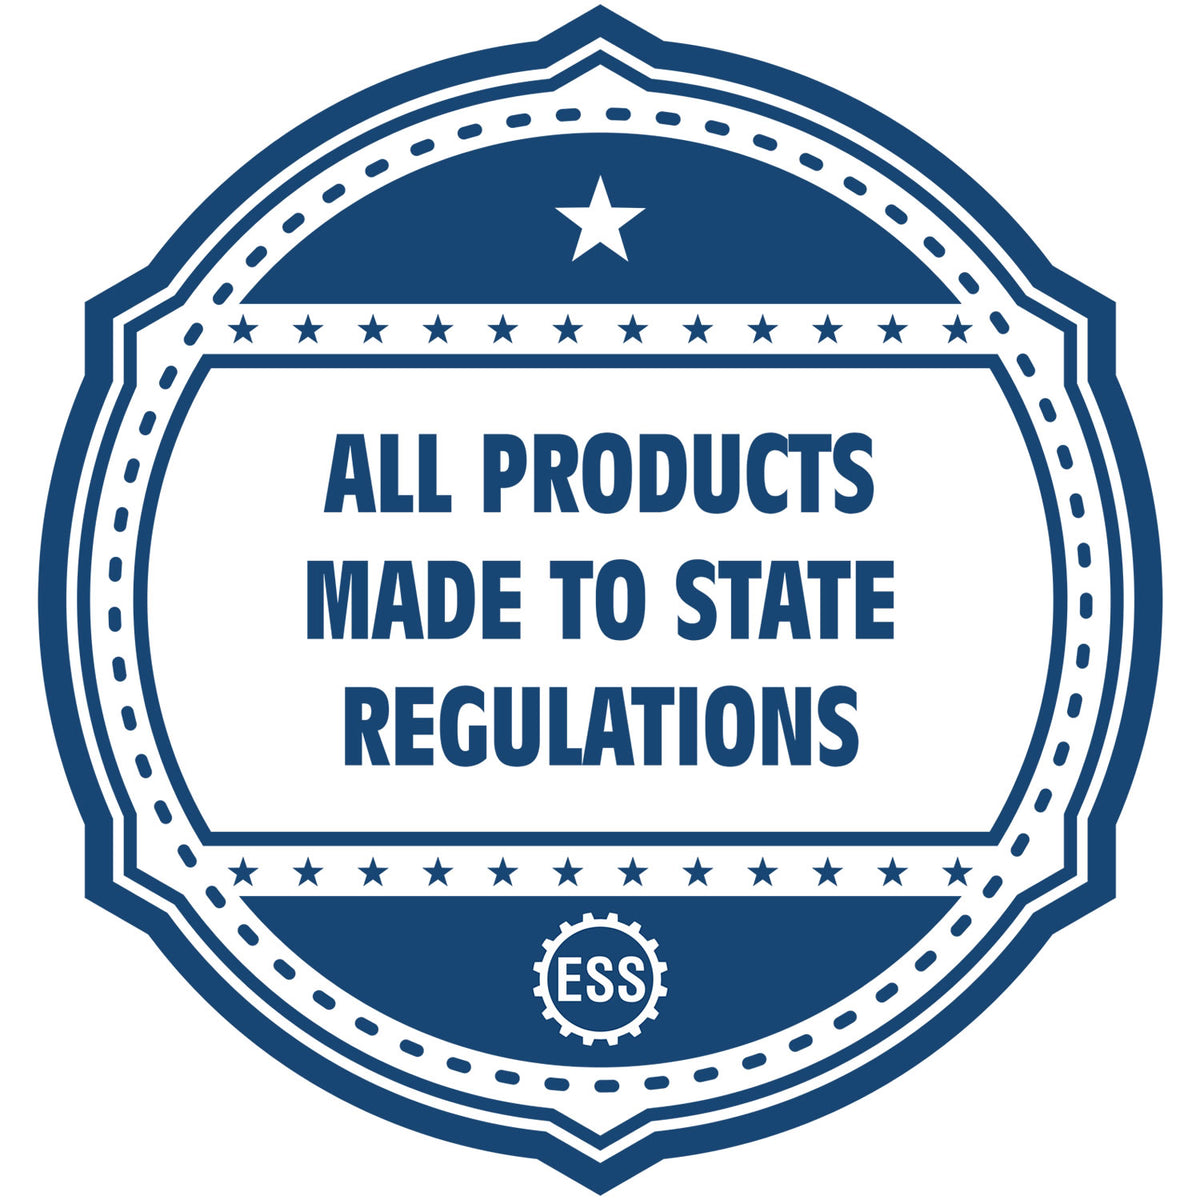 A blue icon or badge for the Hybrid Florida Architect Seal showing that this product is made in compliance with state regulations.